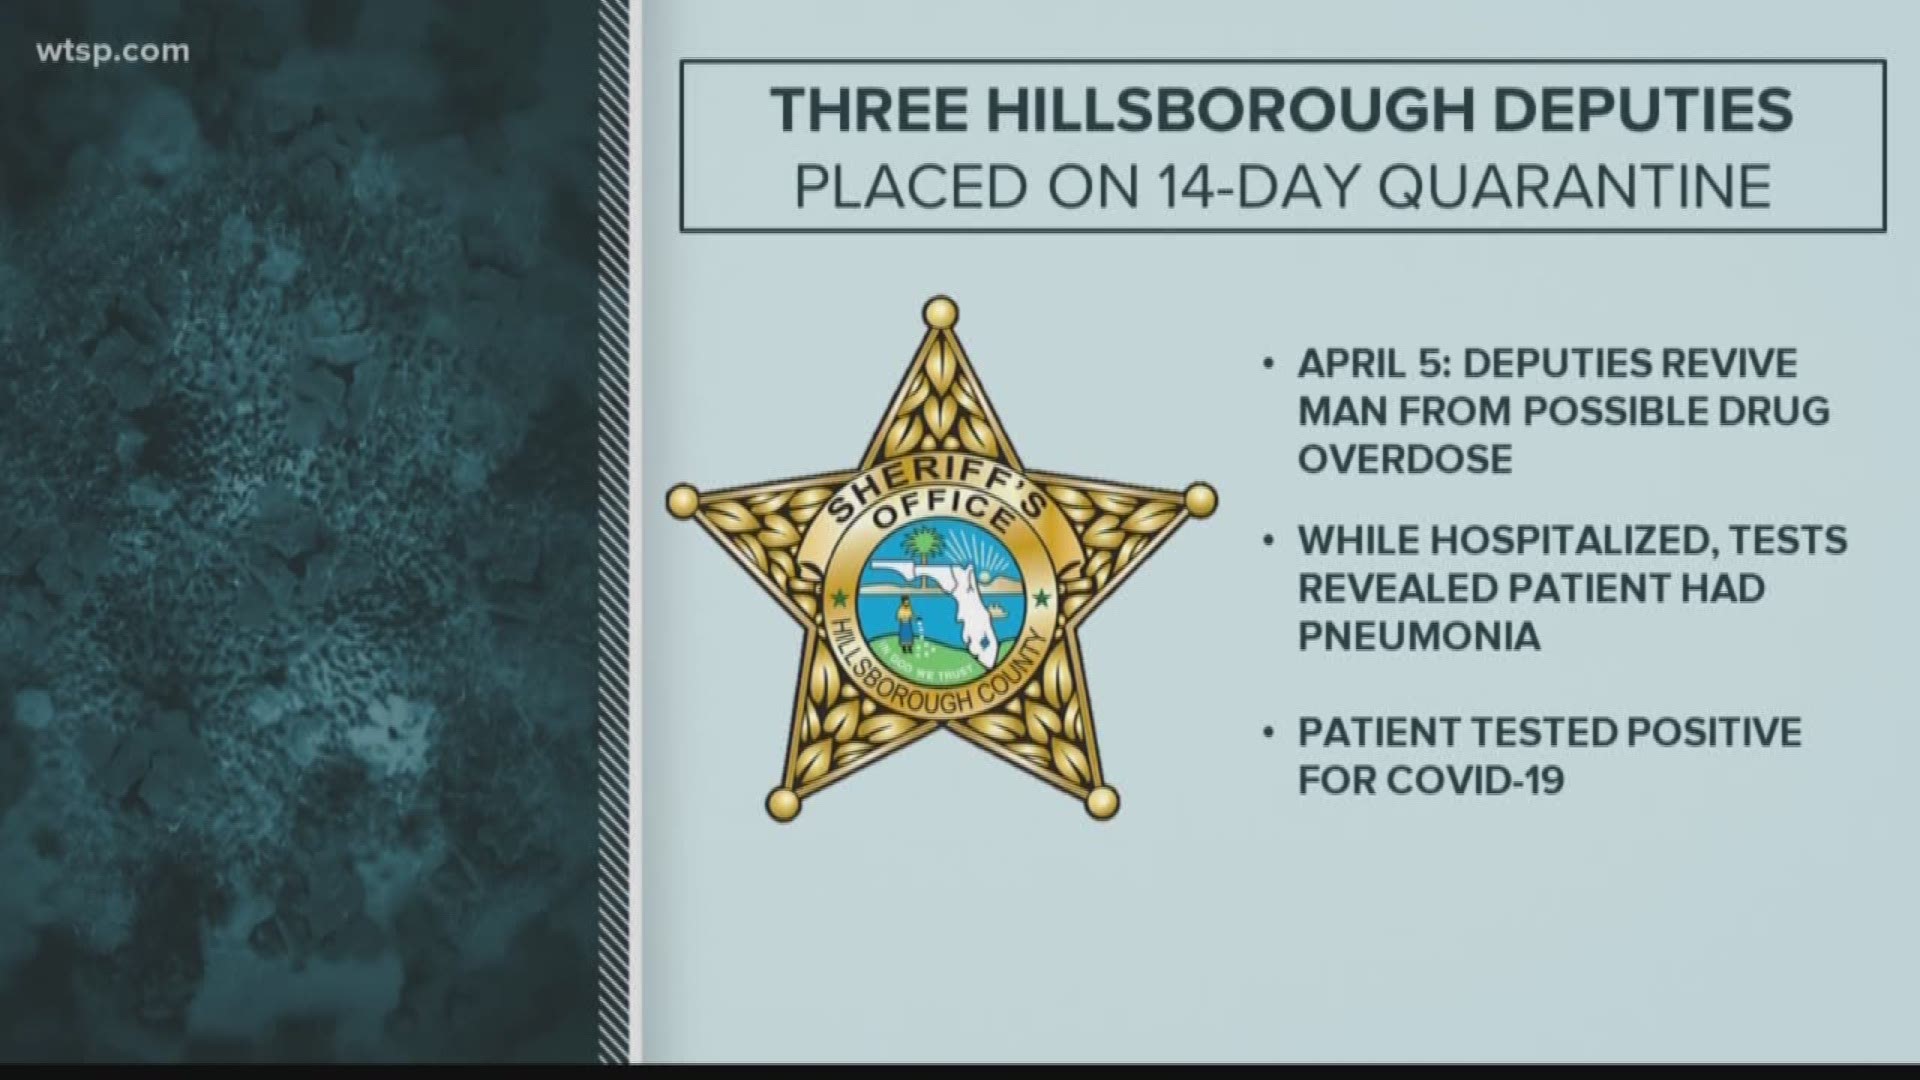 Three Hillsborough County Sheriff's Office deputies are on a 14-day quarantine after being exposed to someone with COVID-19 coronavirus.